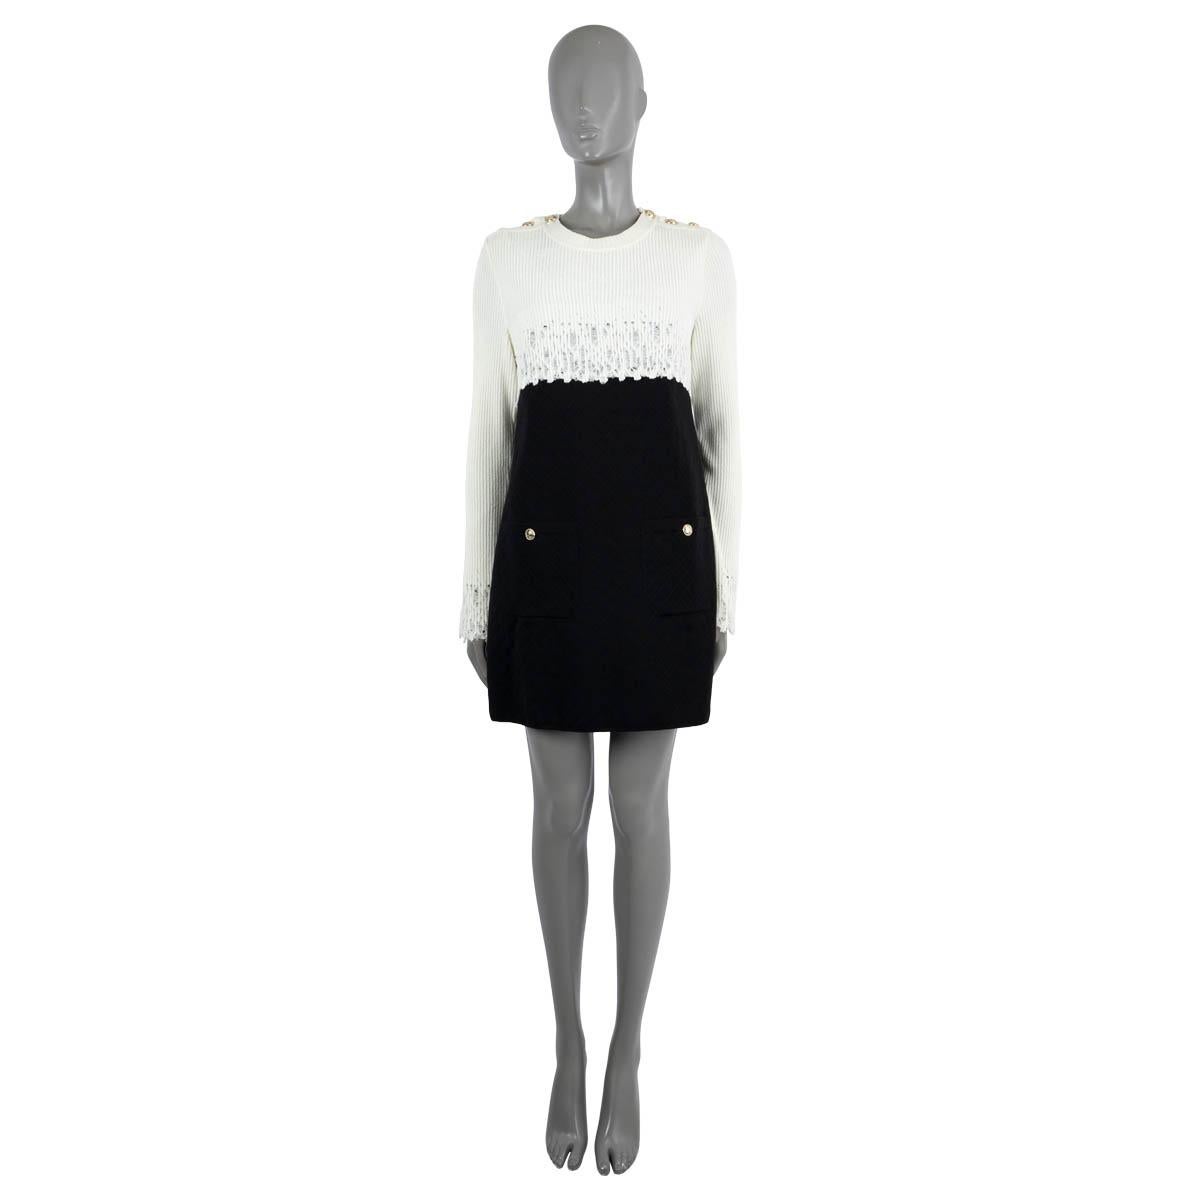 100% authentic Chanel colorblock knit dress with a top in ivory rib-knit viscose (60%) and polyamide (40%) and a skirt in black quilted wool (94%), polyamide (5%) and elastane (1%). Features gold-buttons on the shoulders, two buttoned patch pockets